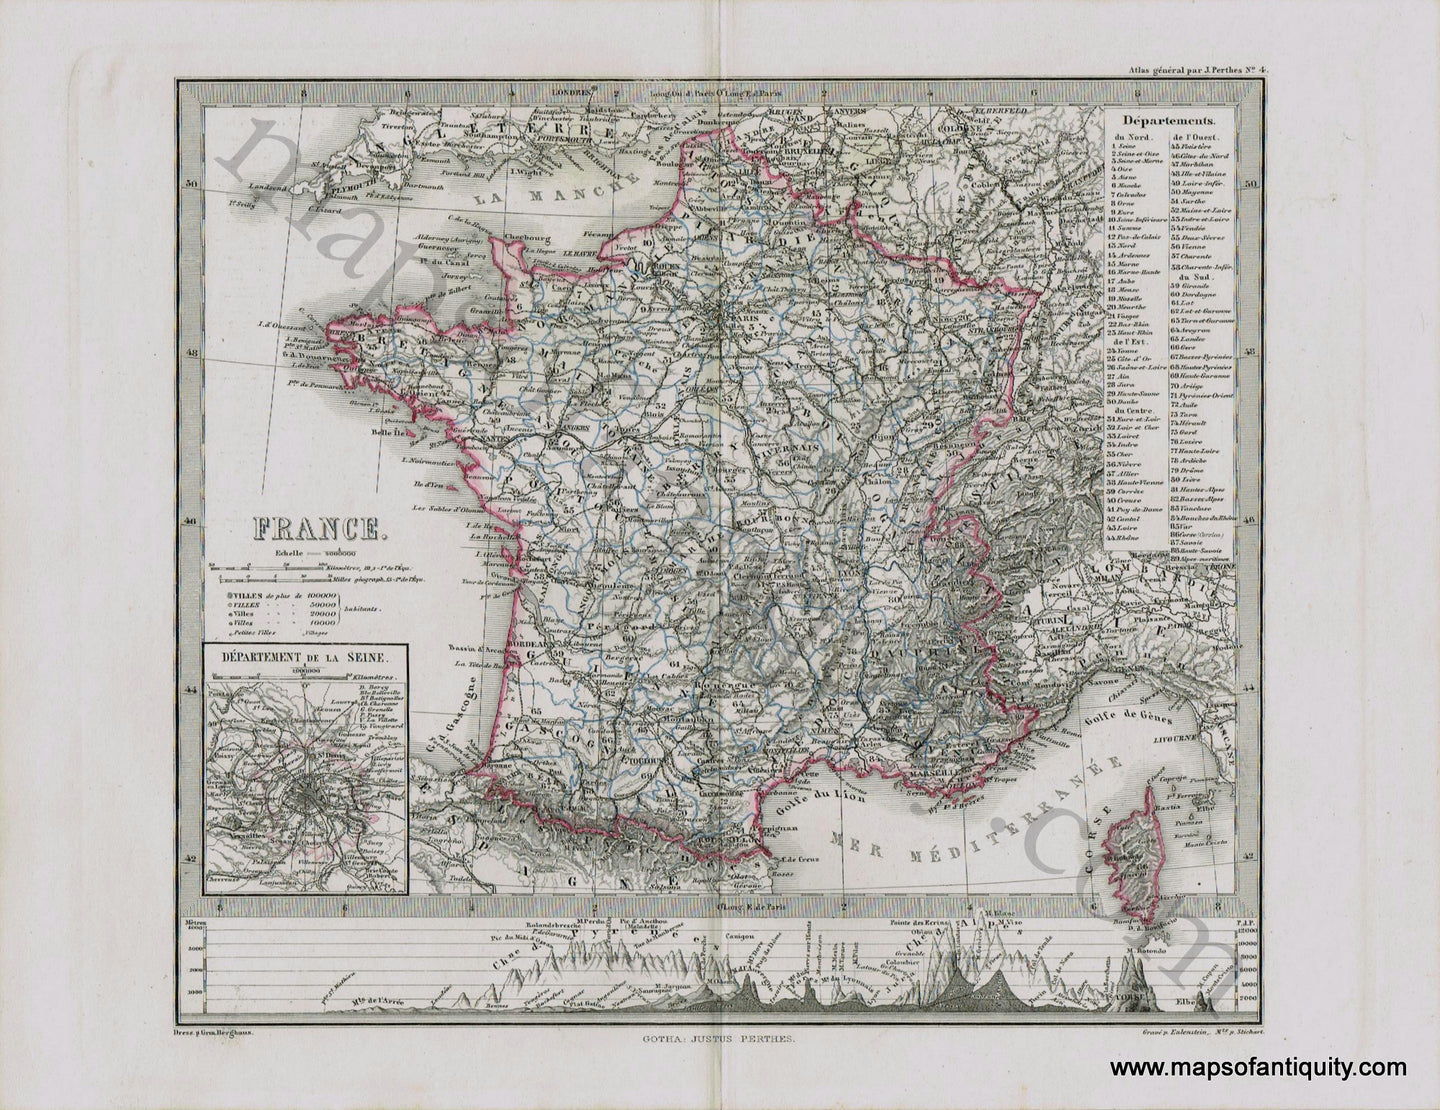 France-Perthes-1871-Antique-Map-1870s-1800s-19th-century-Maps-of-Antiquity